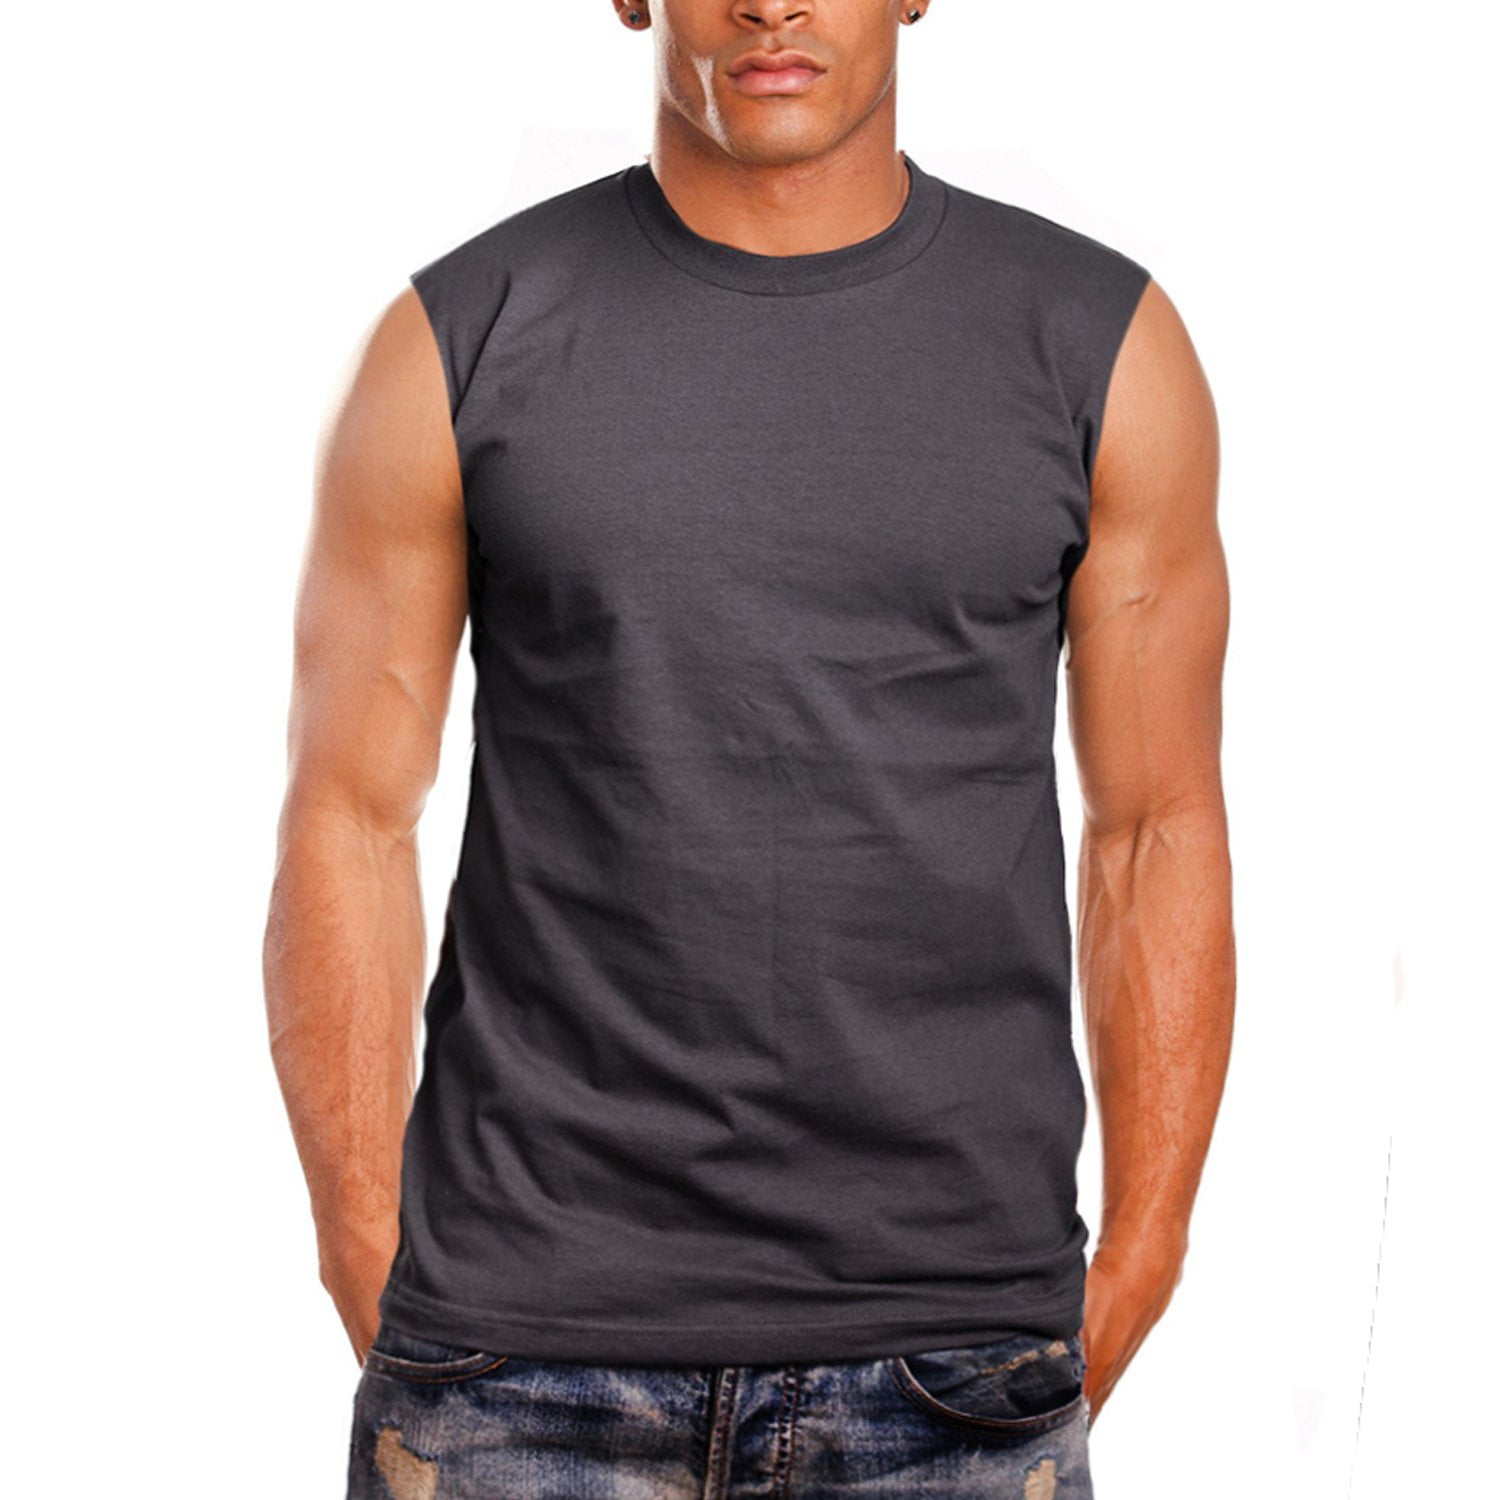 GymLeader Gym Tank Tops for Men Solid Workout Tanks Sleeveless T Shirt Y-Back Athletic Shirt